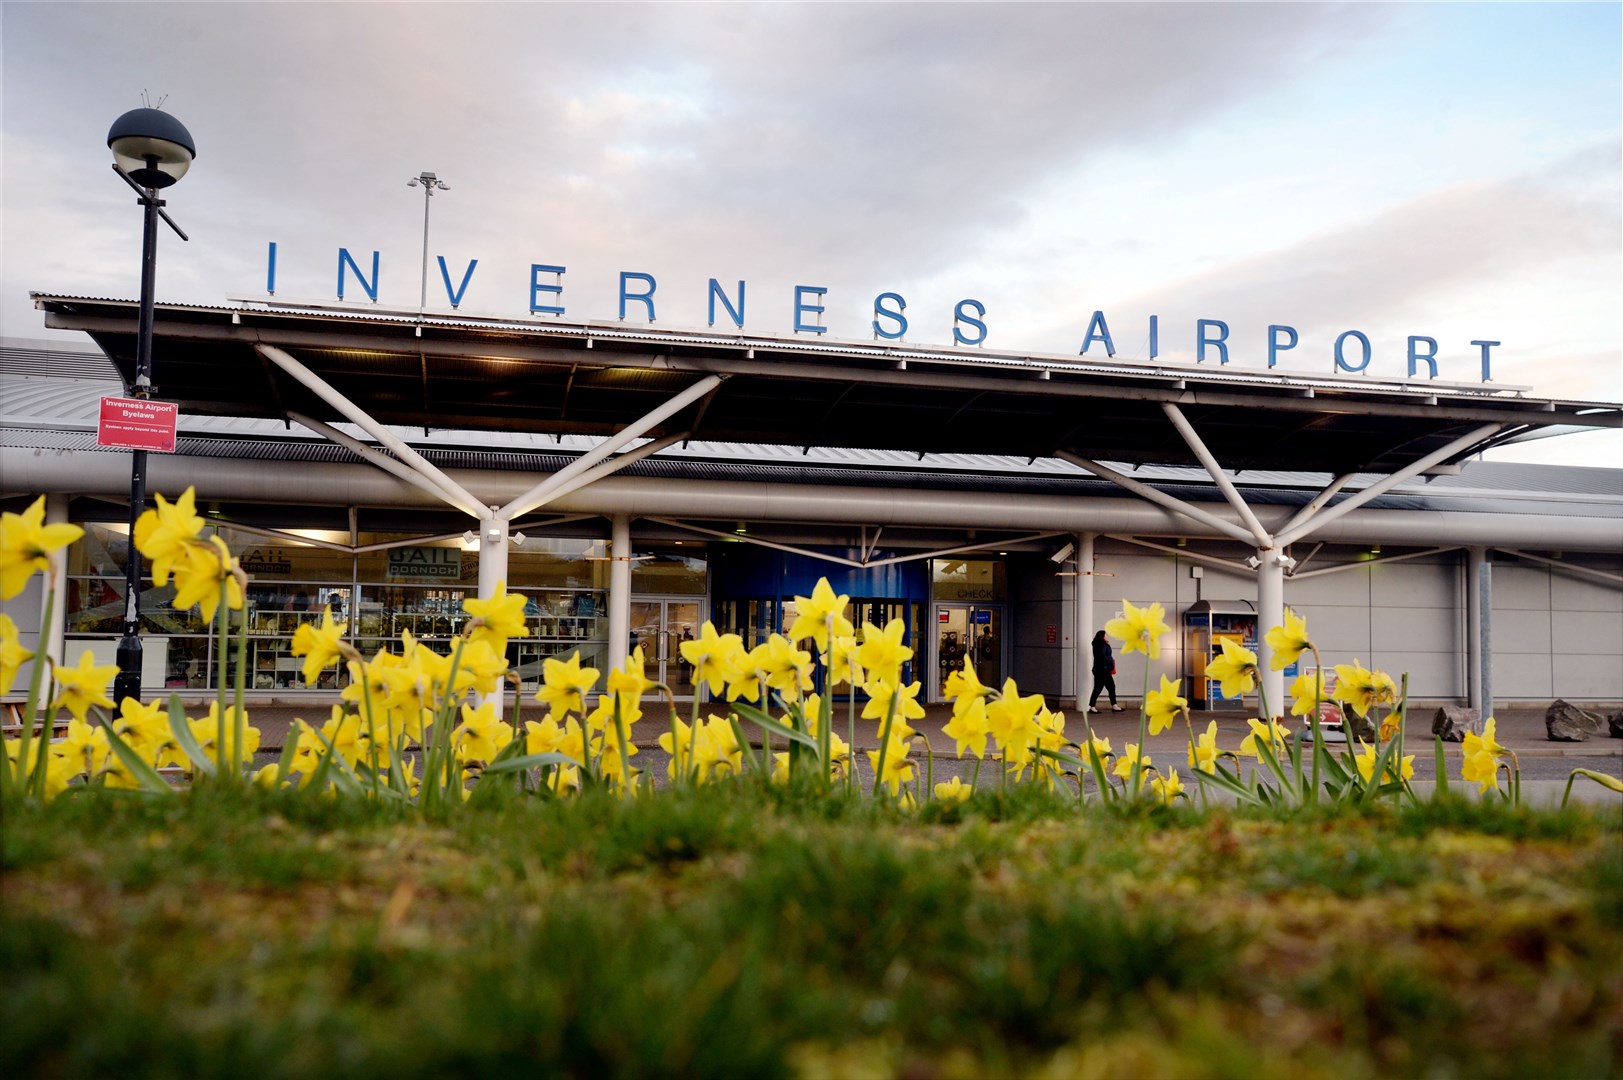 Flights will be grounded at Inverness Airport on Thursday as air traffic controllers go on strike.